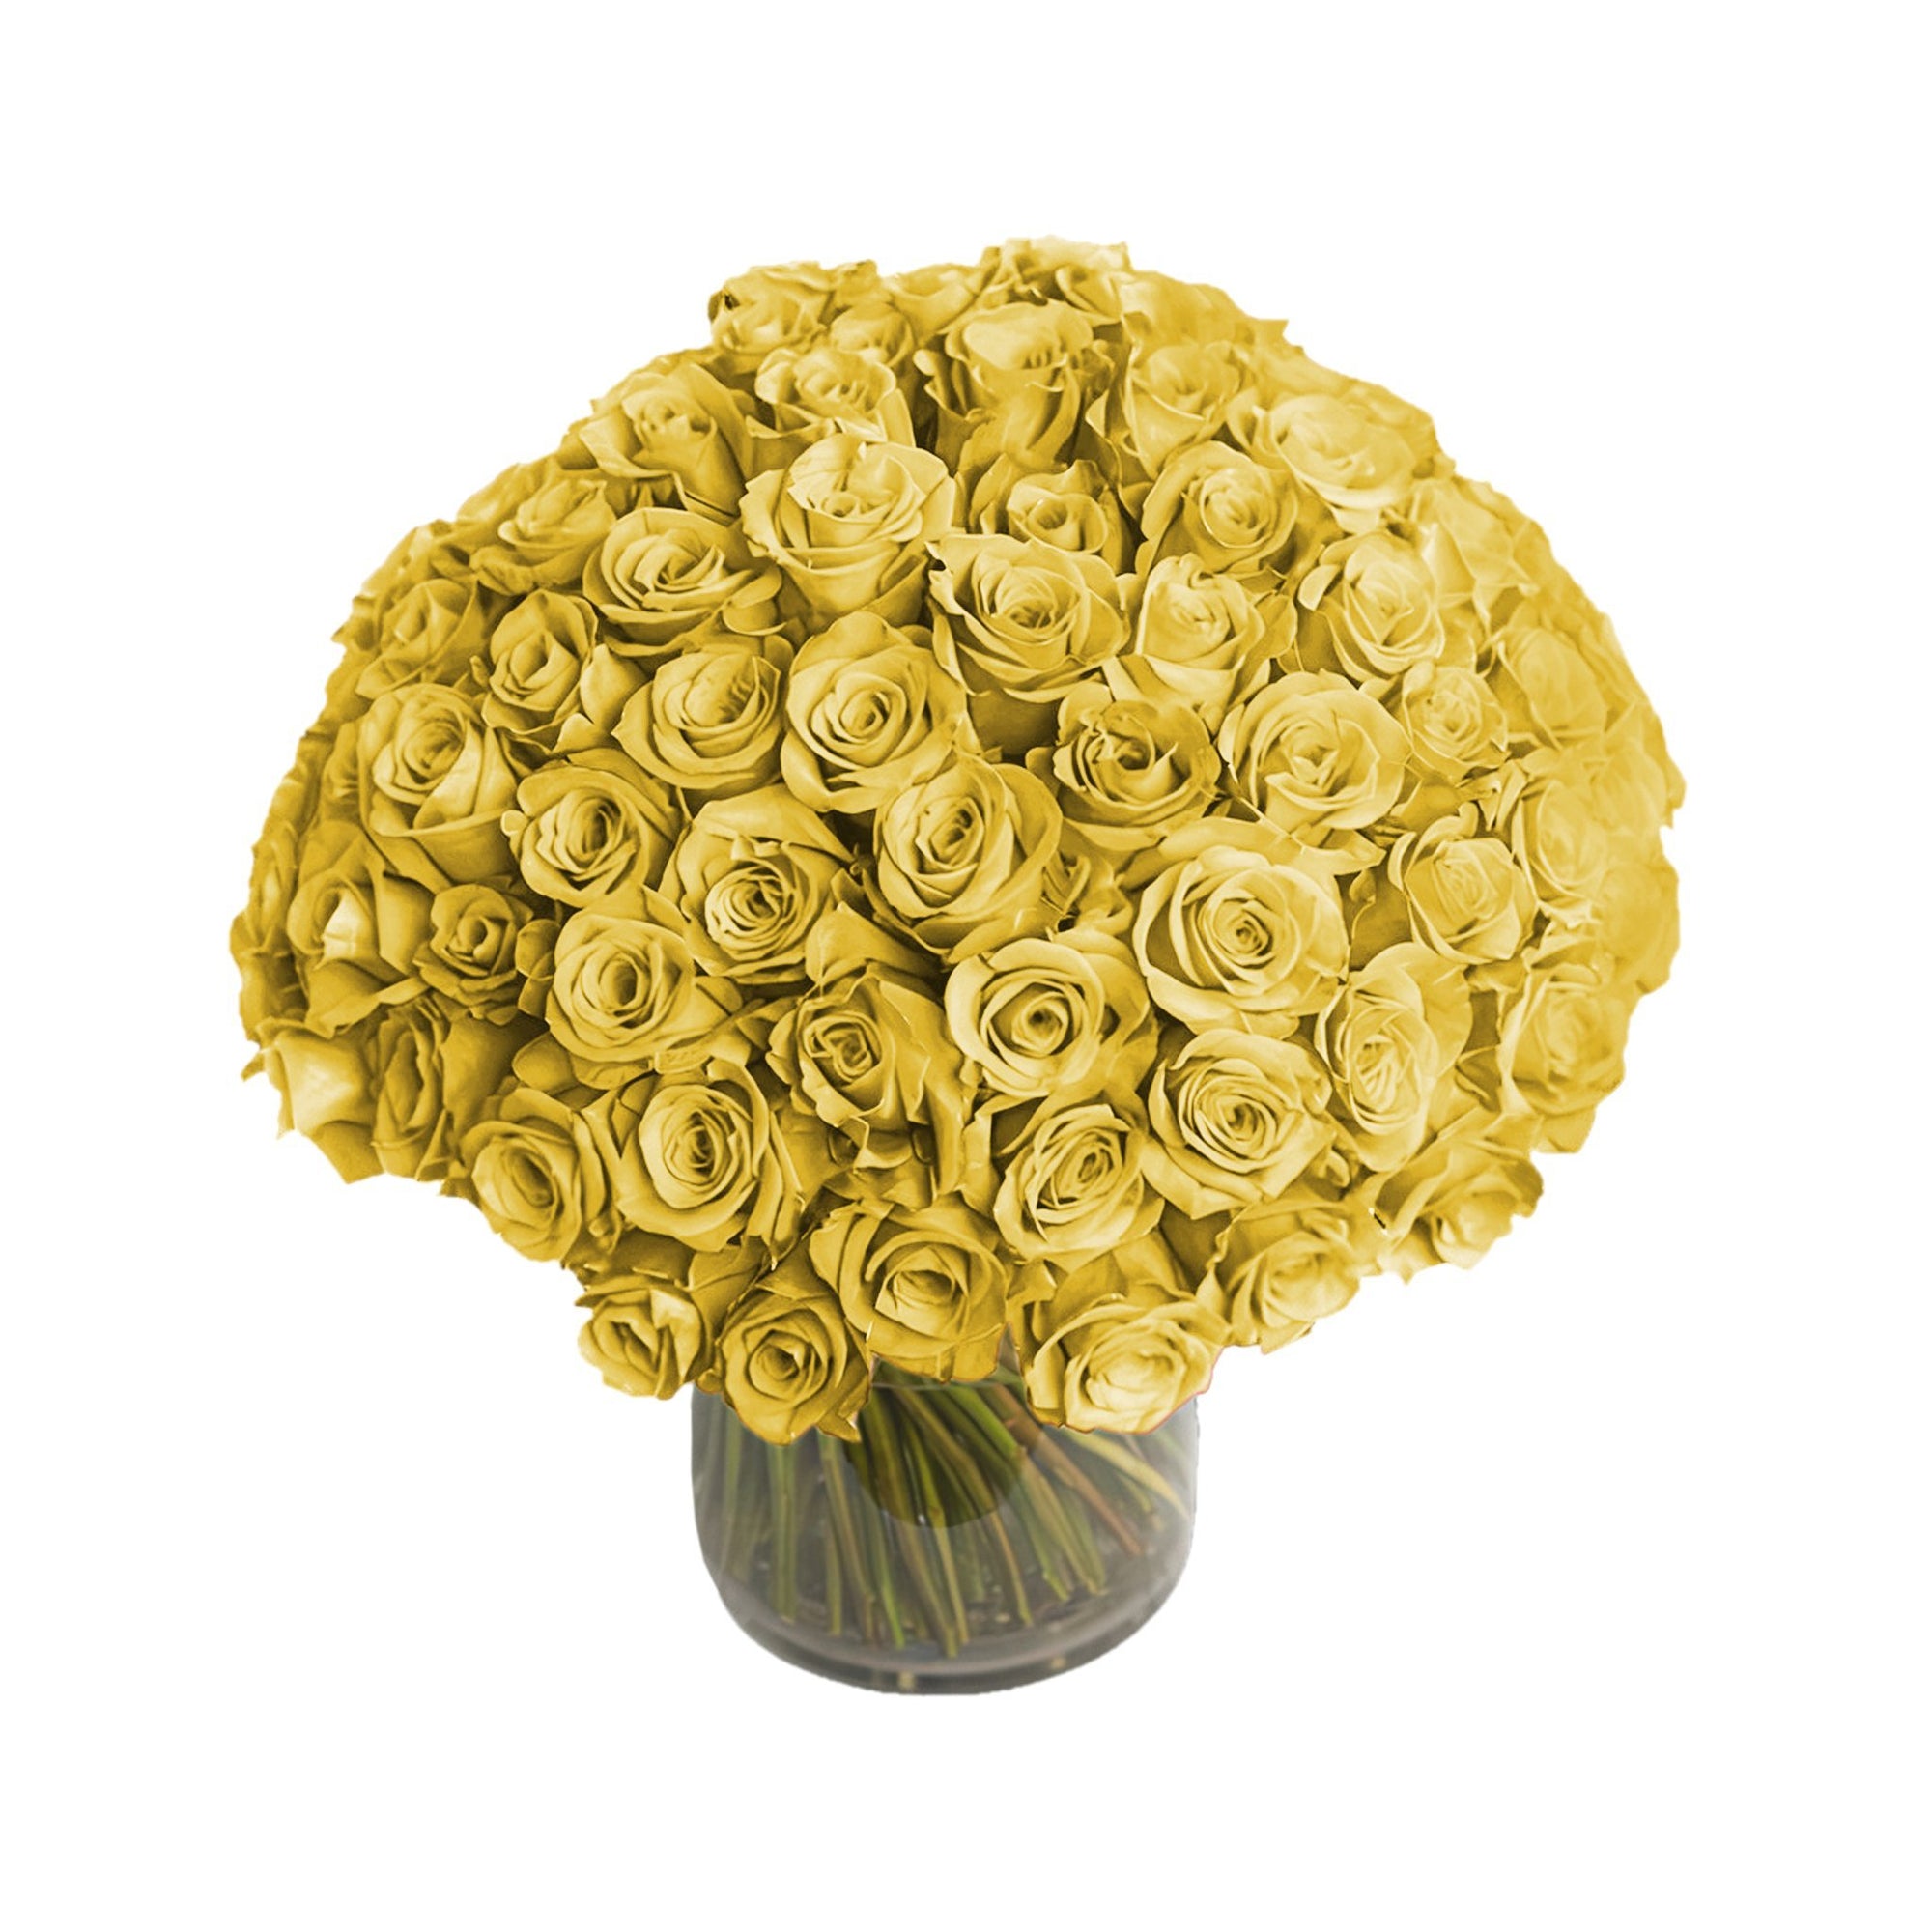 Manhattan Flower Delivery - Fresh Roses in a Vase | 100 Yellow Roses - Roses